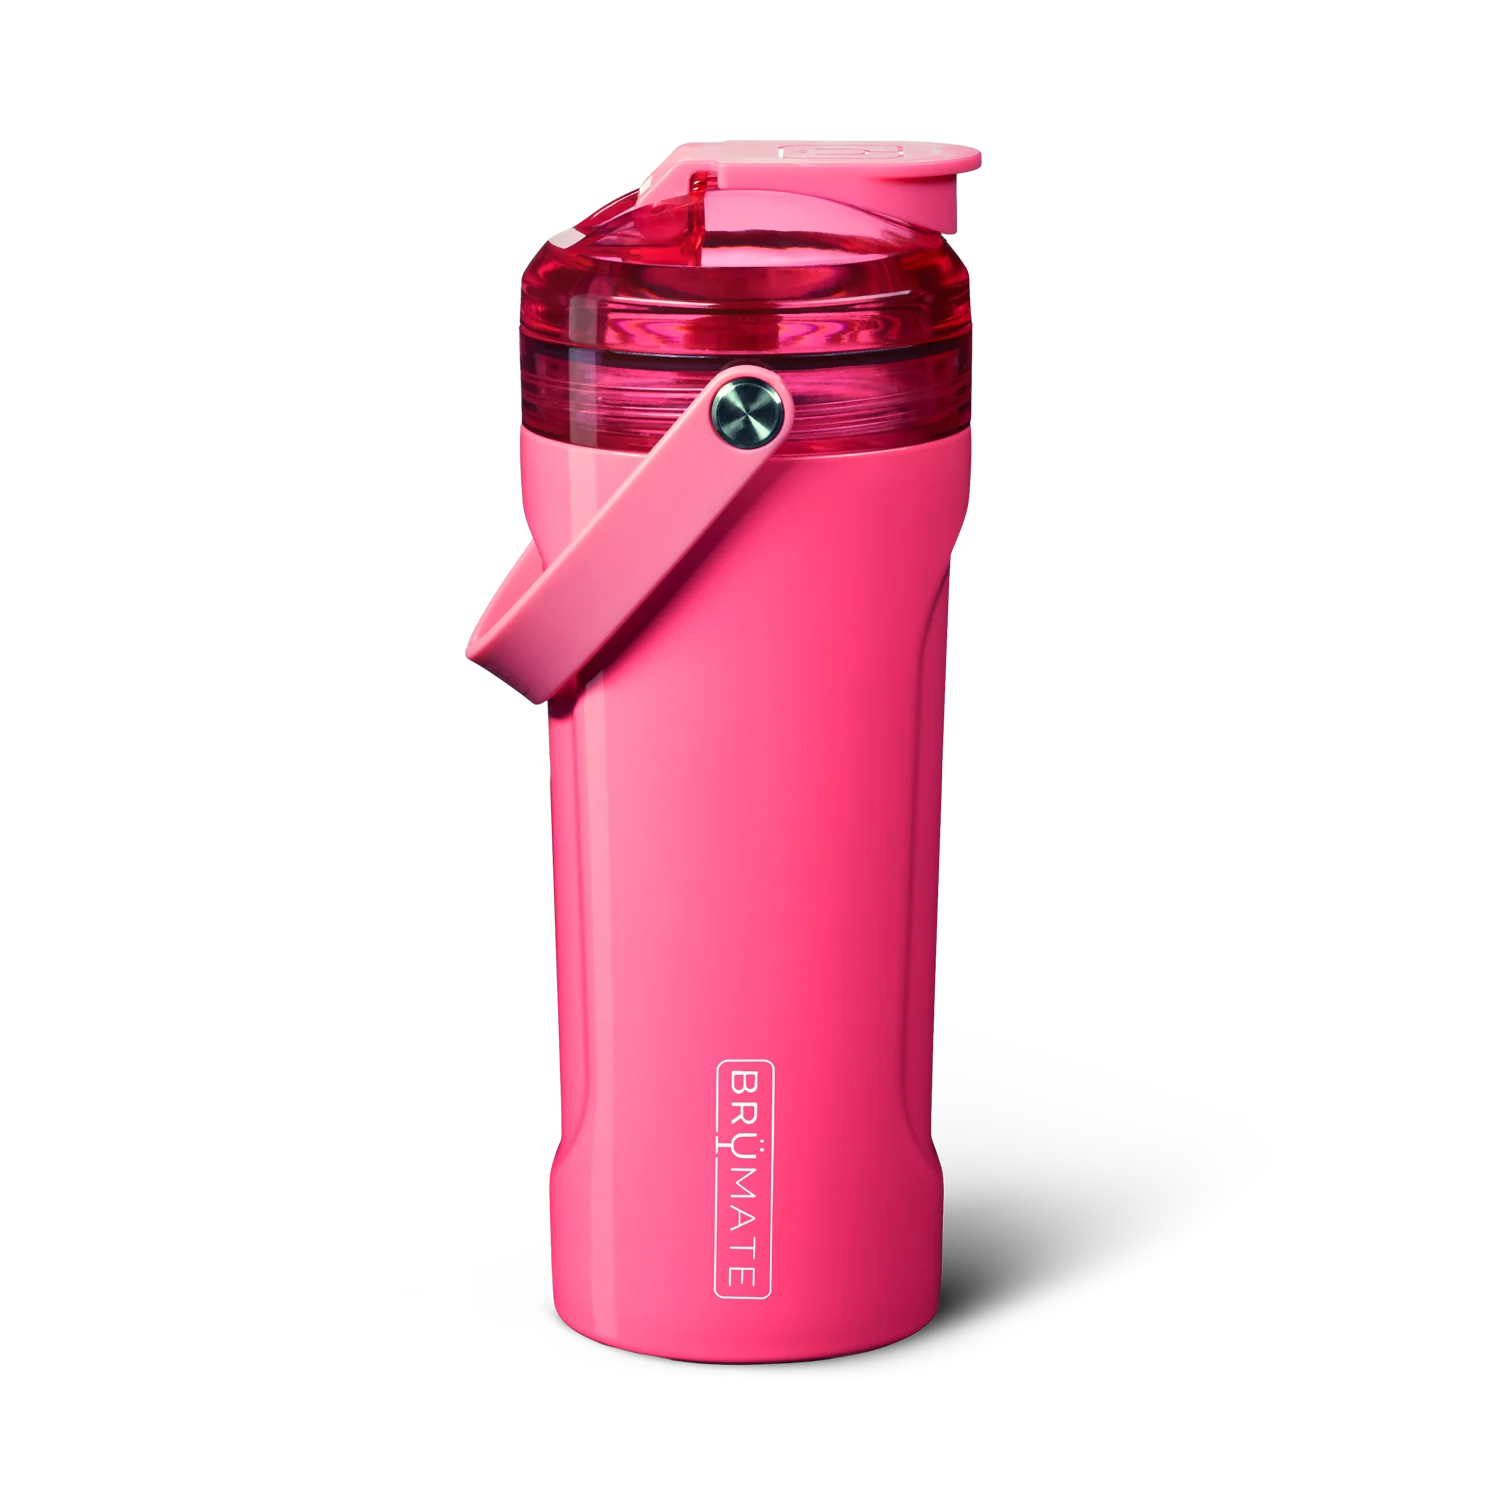 The MultiShaker is made for elevating your fitness journey. Our built-in patent-pending agitator blends your shakes, greens, and powders without any clumps, while also serving as a water infuser for herbs and fruits. It includes our BevGuard™ insulation to keep ice for 24+ hours, a spill-proof MagFlip™ lid, volume markings on the inside, a durable silicone handle, a non-slip base, and the ability to interchange tops with our MÜV or Straw Lids, making it perfect for any workout or adventure.(neon pink0